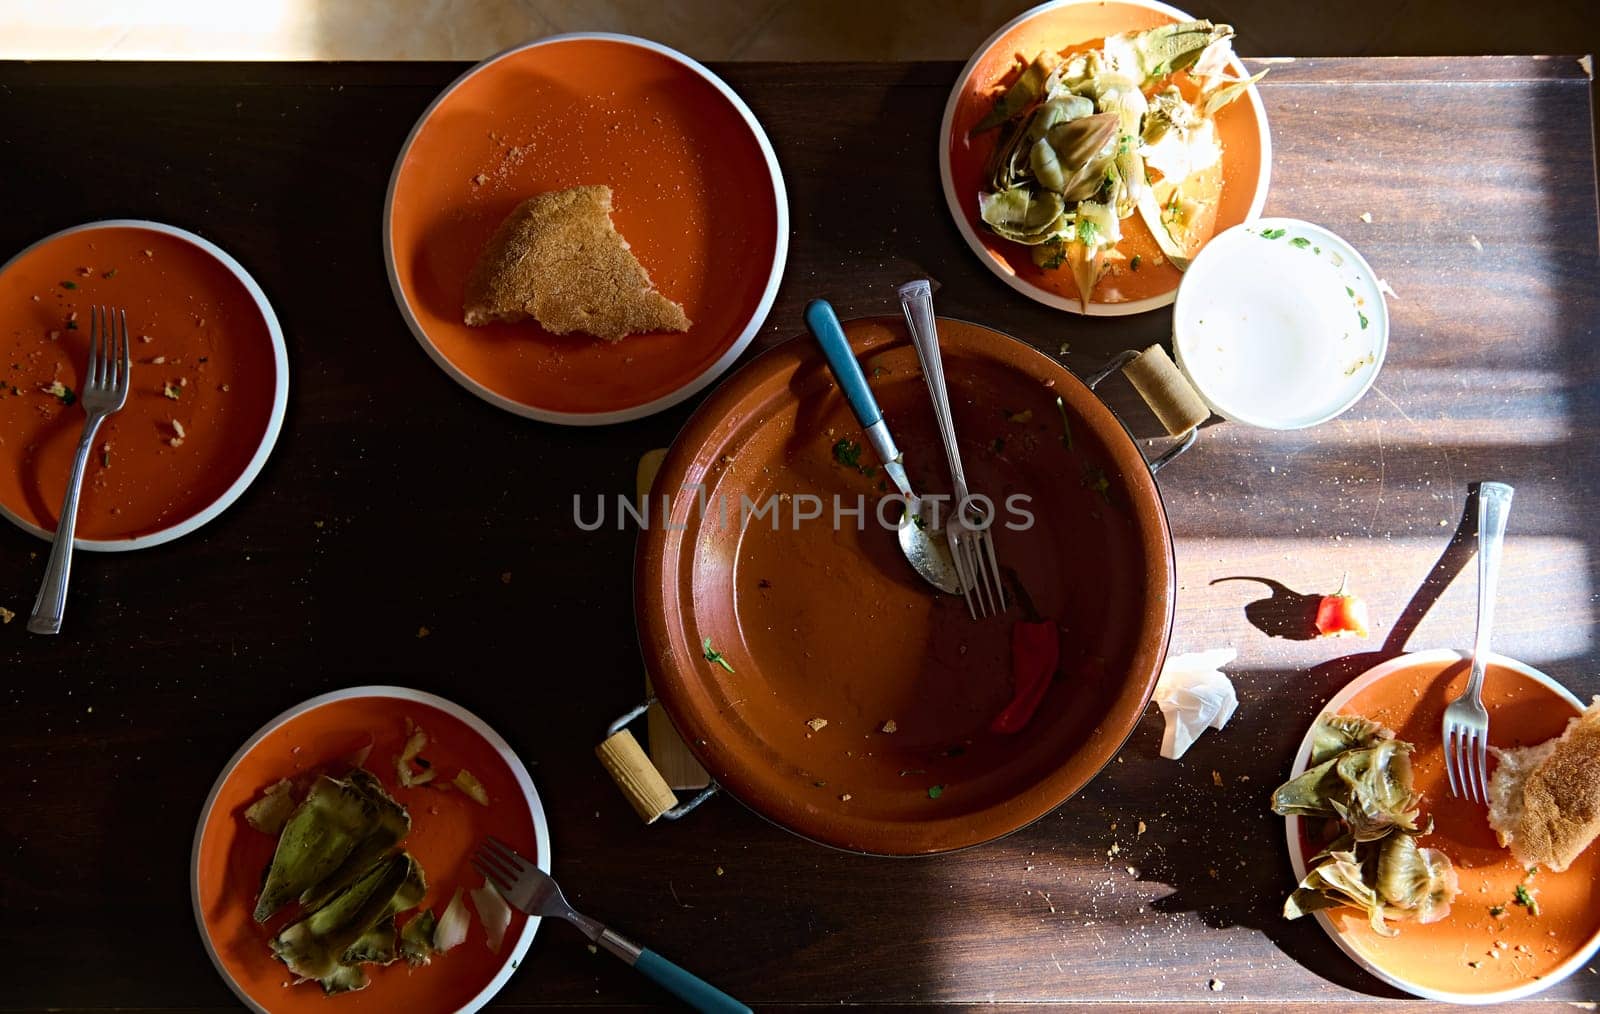 Top view of empty clay dish tagine and dirty plates with the rest of food after dinner on a wooden table by artgf